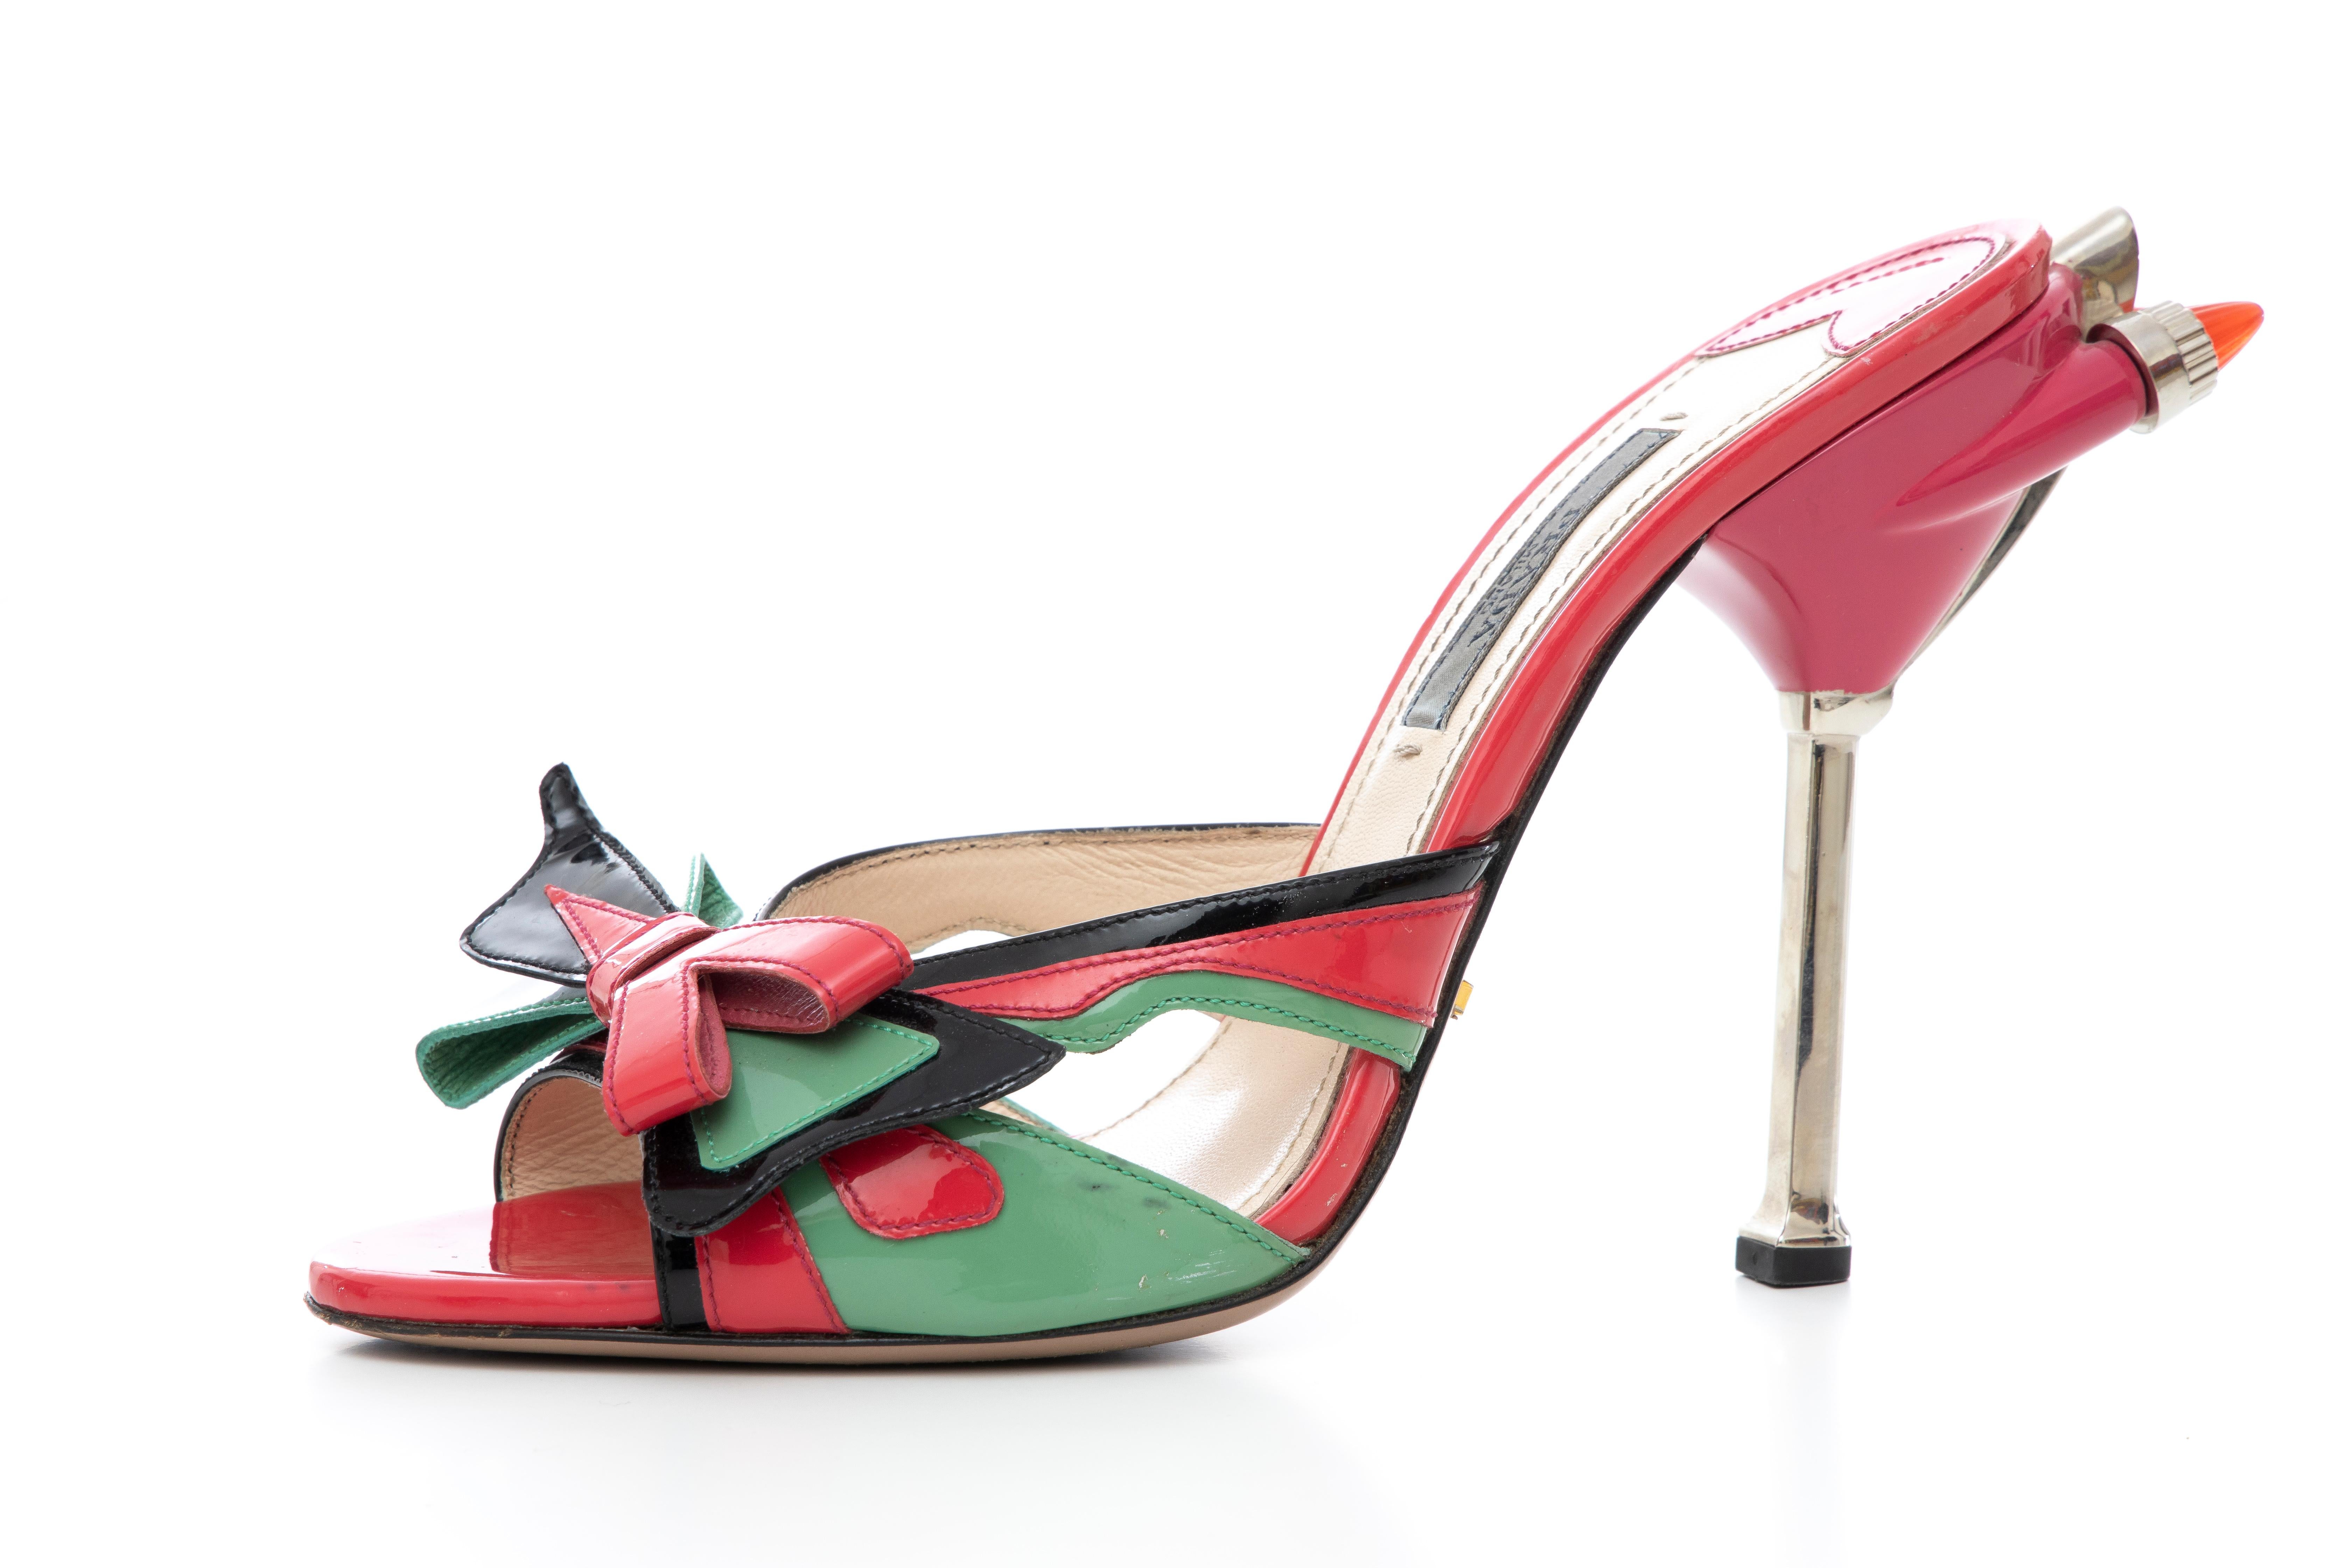 Prada, Spring-Summer 2012, patent leather Hot Rod slide sandals with bow accents at uppers and tail light embellishments at heels.

Heels: 5

IT. 37.5
US. 7.5